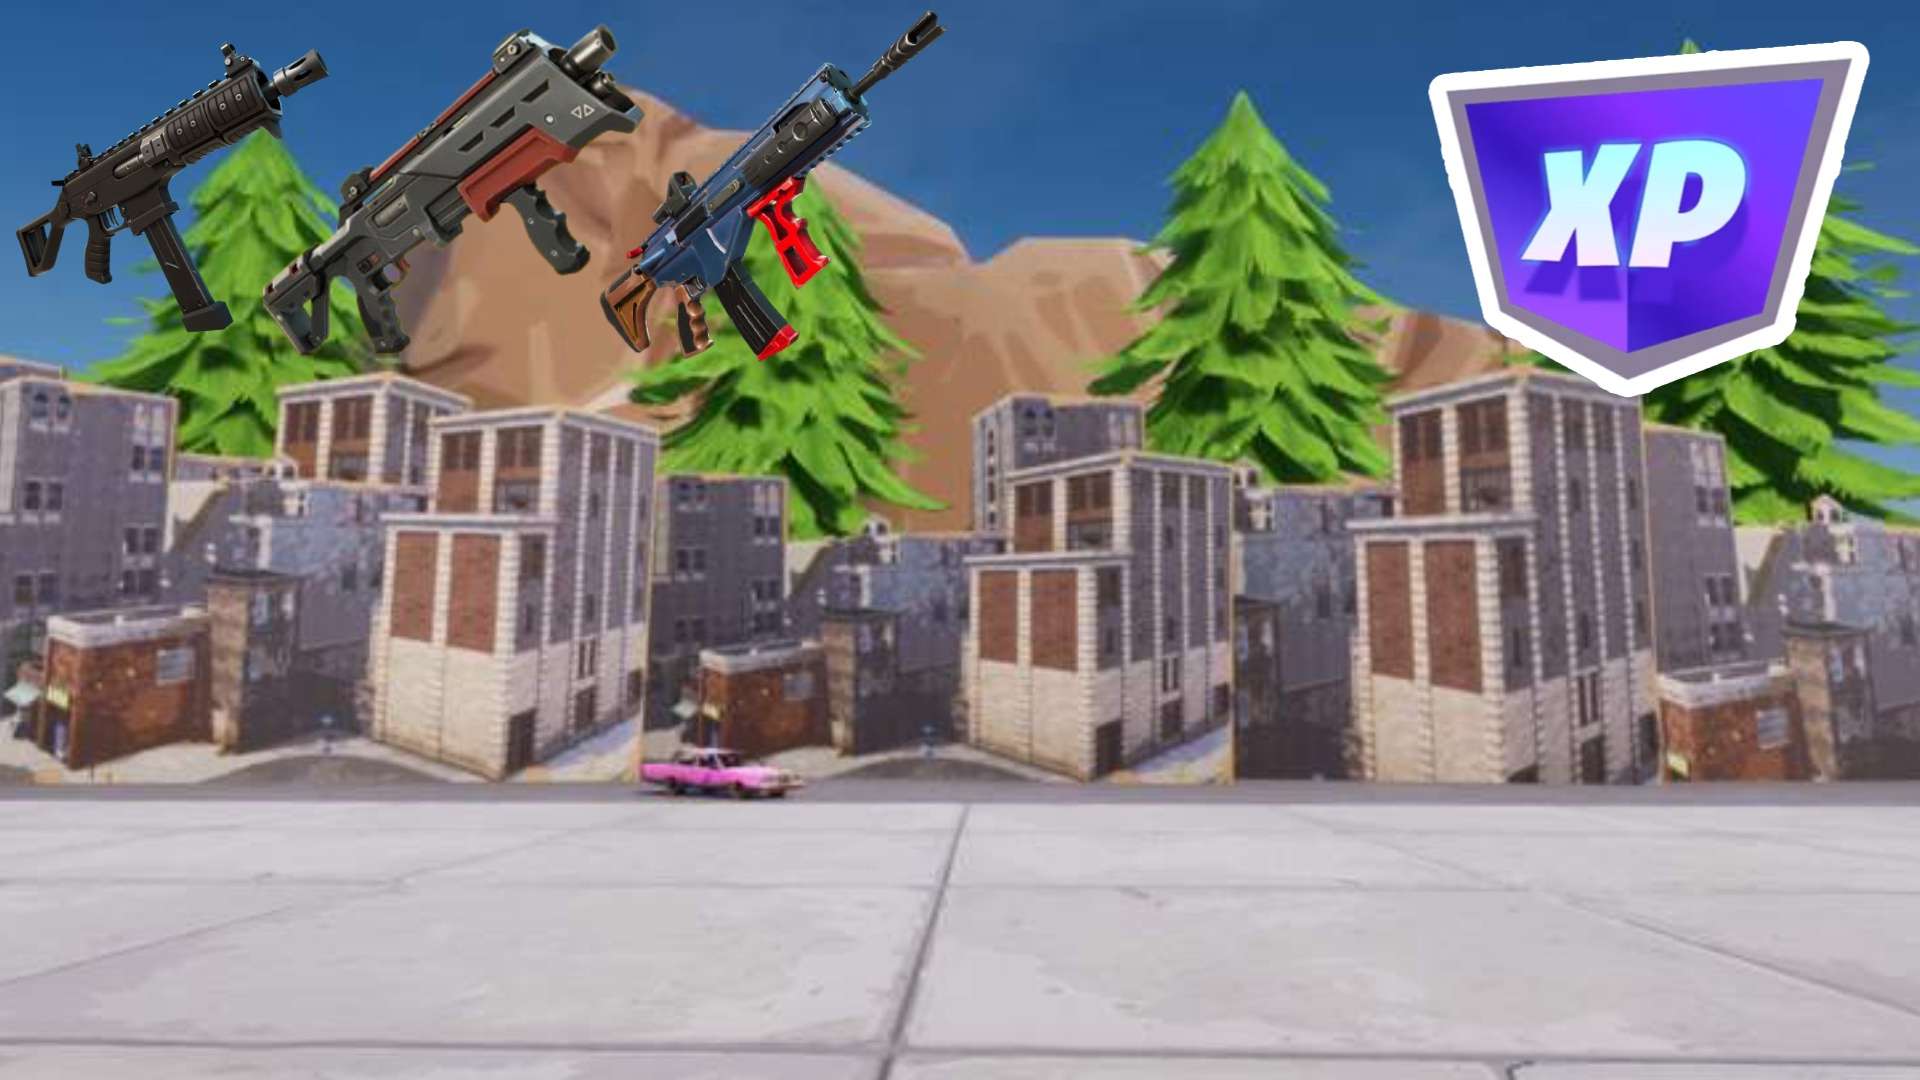 ⭐️⭐️⭐️TILTED TOWERS⭐⭐⭐️